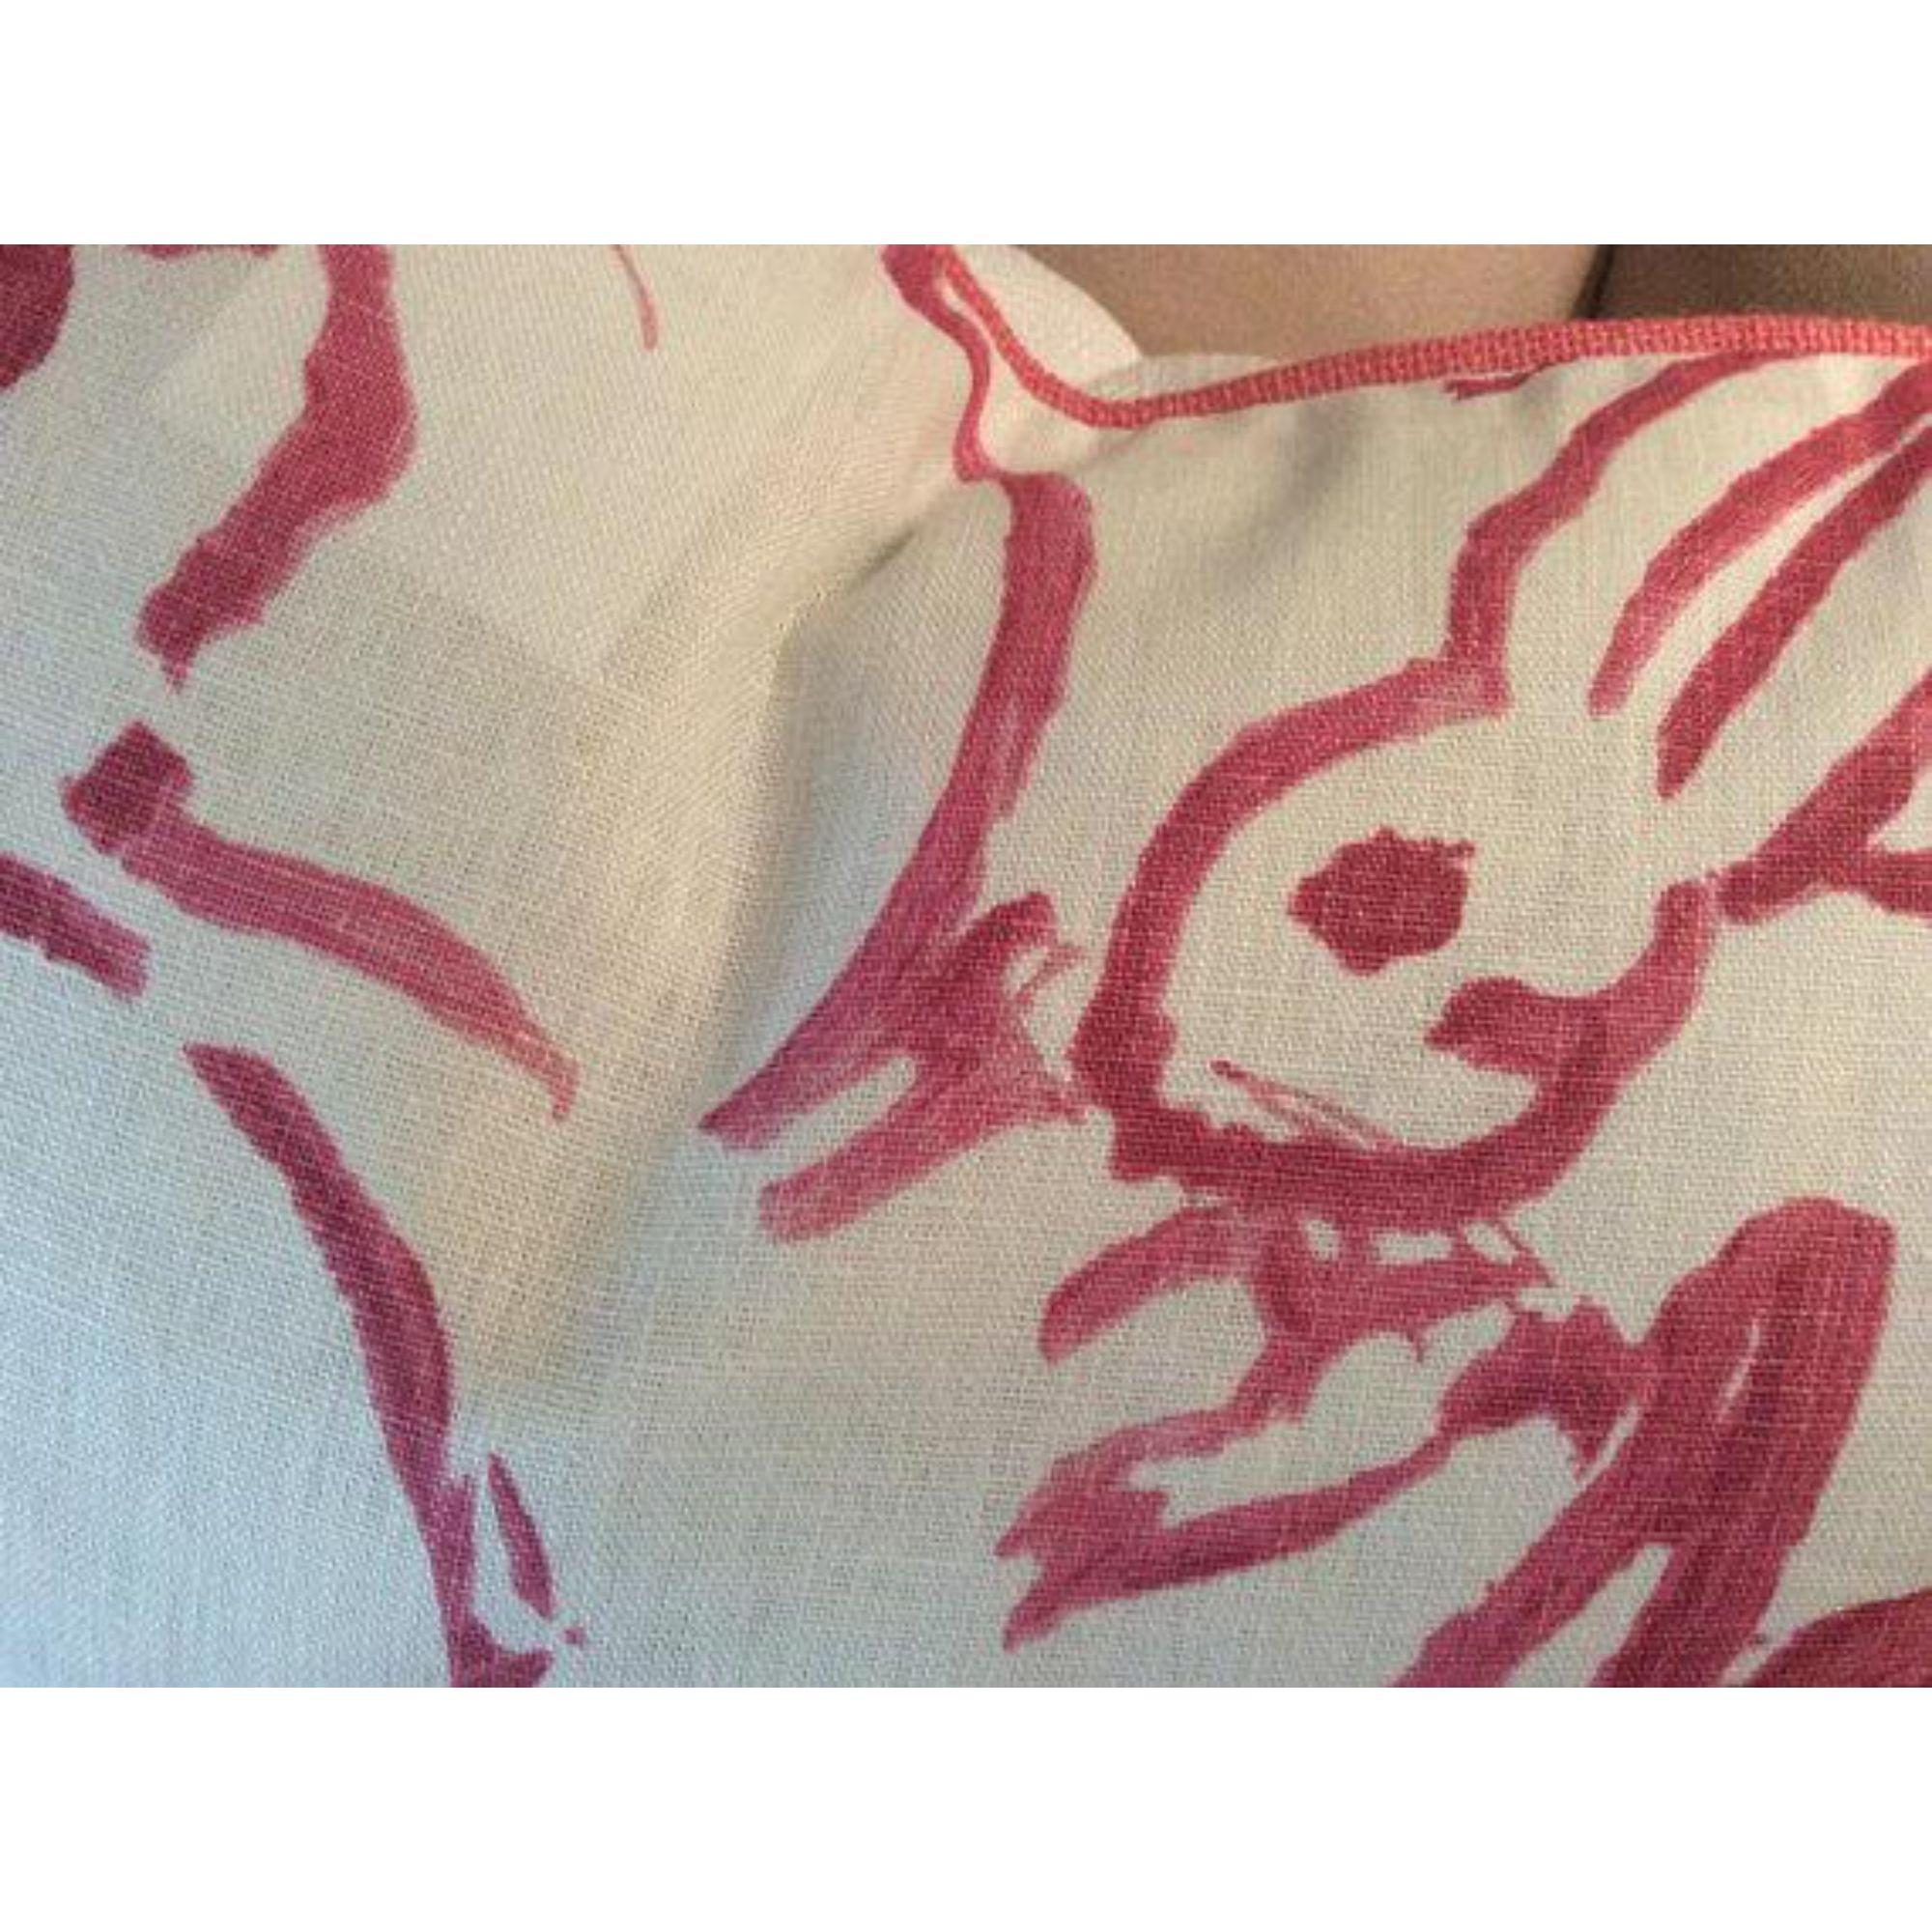 American Pink Lee Jofa Hunt Slonen Bunny Hutch Pillows - A Pair For Sale